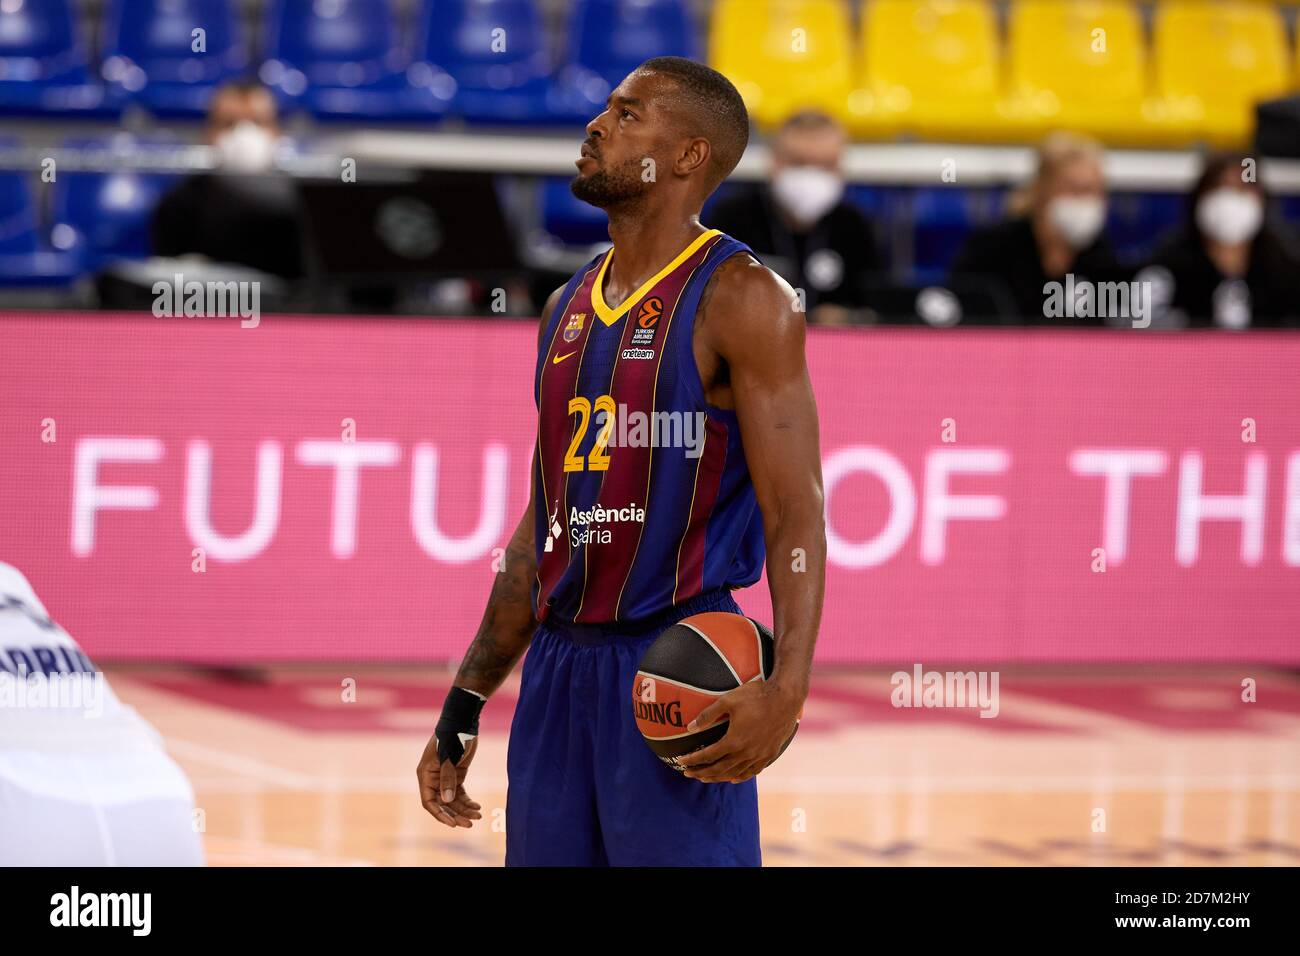 Barcelona, Spain. 23rd Oct 2020. Cory Higgins of FC Barcelona during the Turkish Airlines EuroLeague match between FC Barcelona and Real Madrid at Palau Blaugrana on October 23, 2020 in Barcelona, Spain. Credit: Dax Images/Alamy Live News Stock Photo